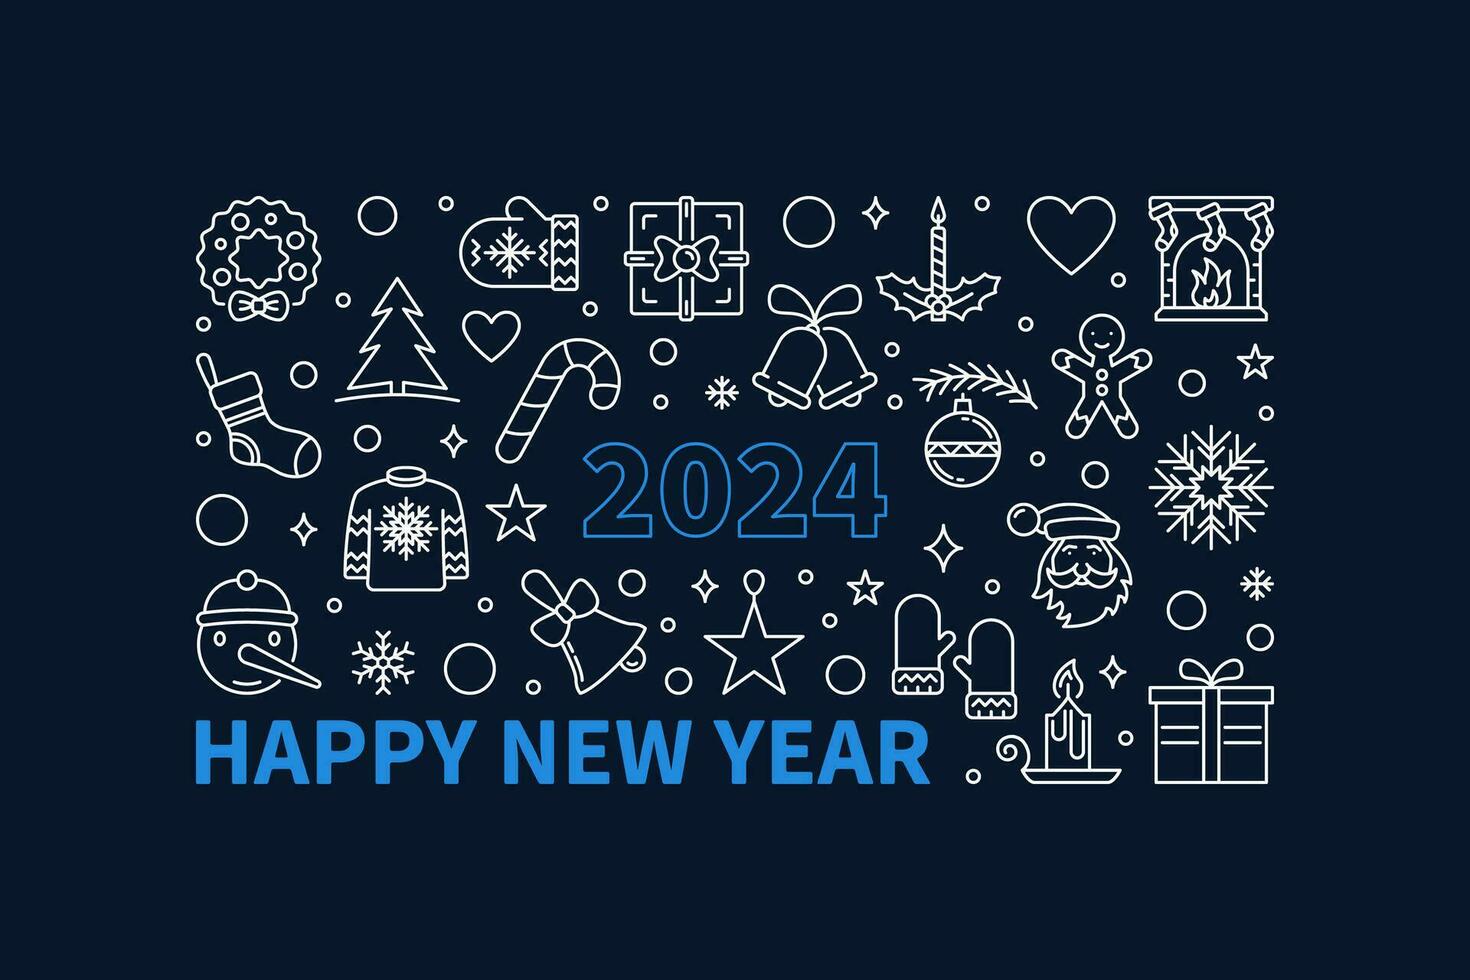 Happy New Year 2024 Greeting Card or Banner - vector outline horizontal illustration